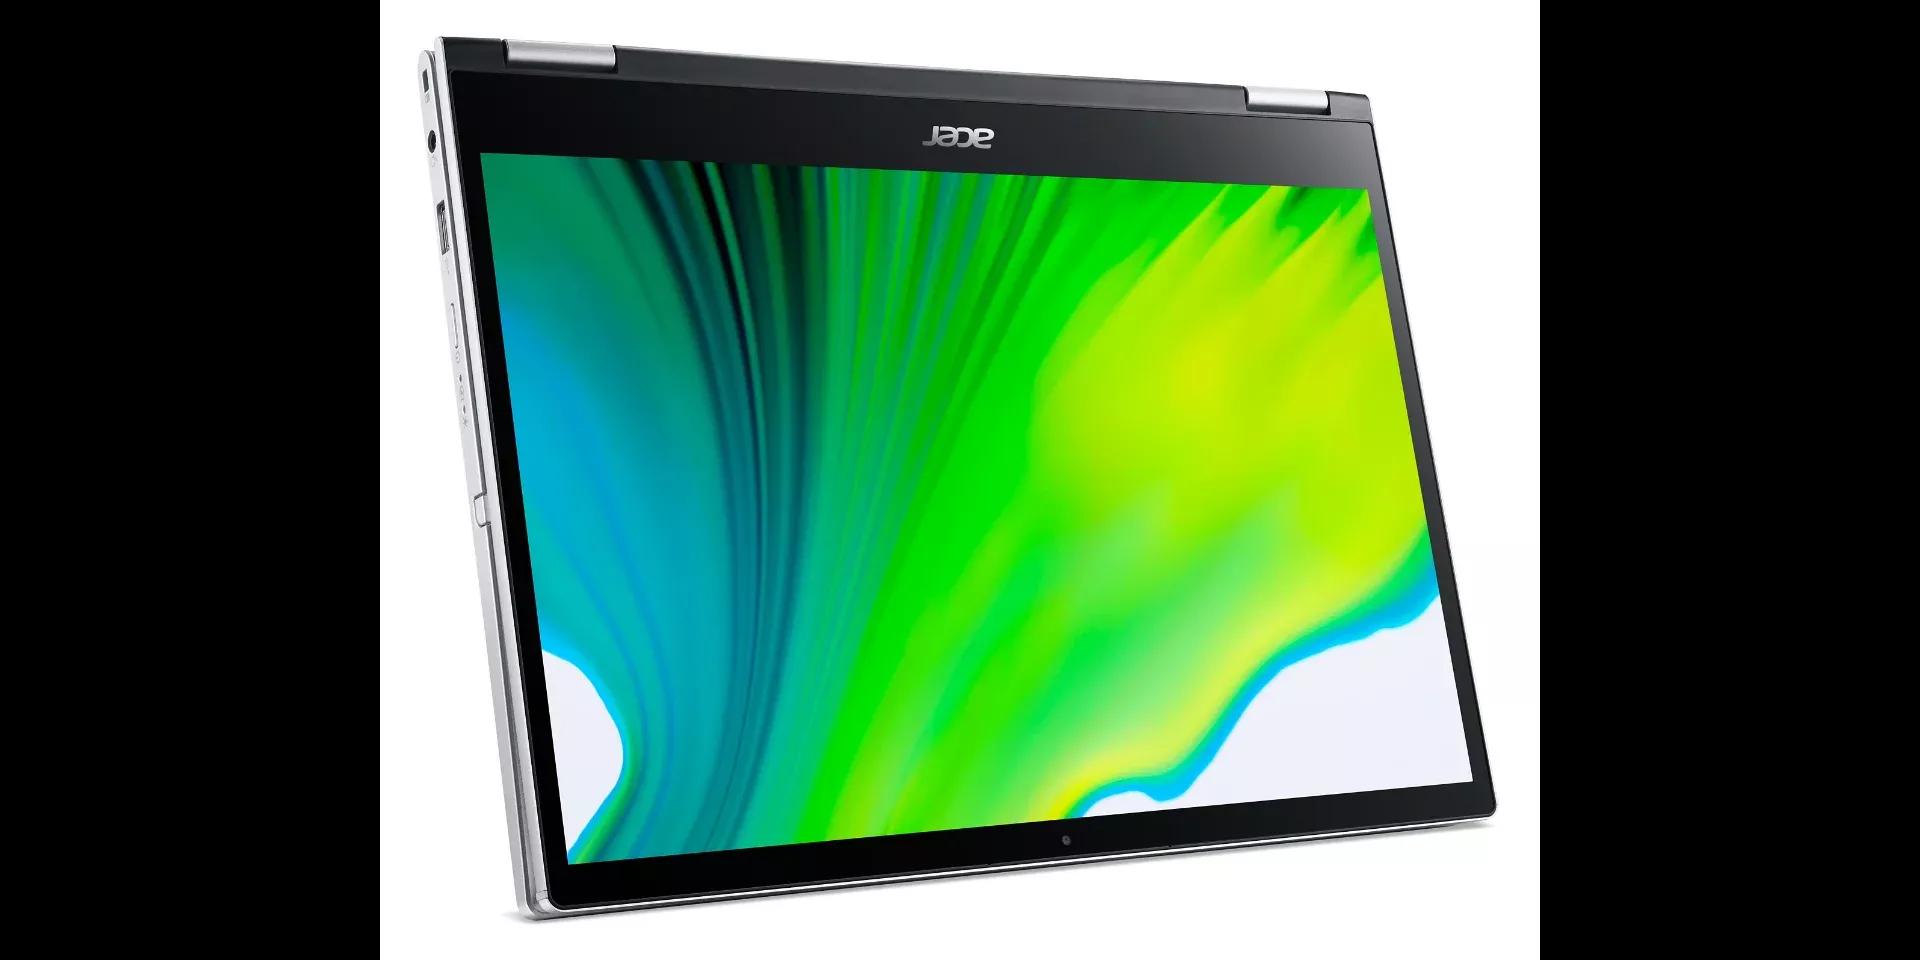 Acer Spin 3 2020 i7 10th Gen / 8GB RAM / 512GB SSD / 14" FHD 360 TouchScreen / Rechargeable Stylus